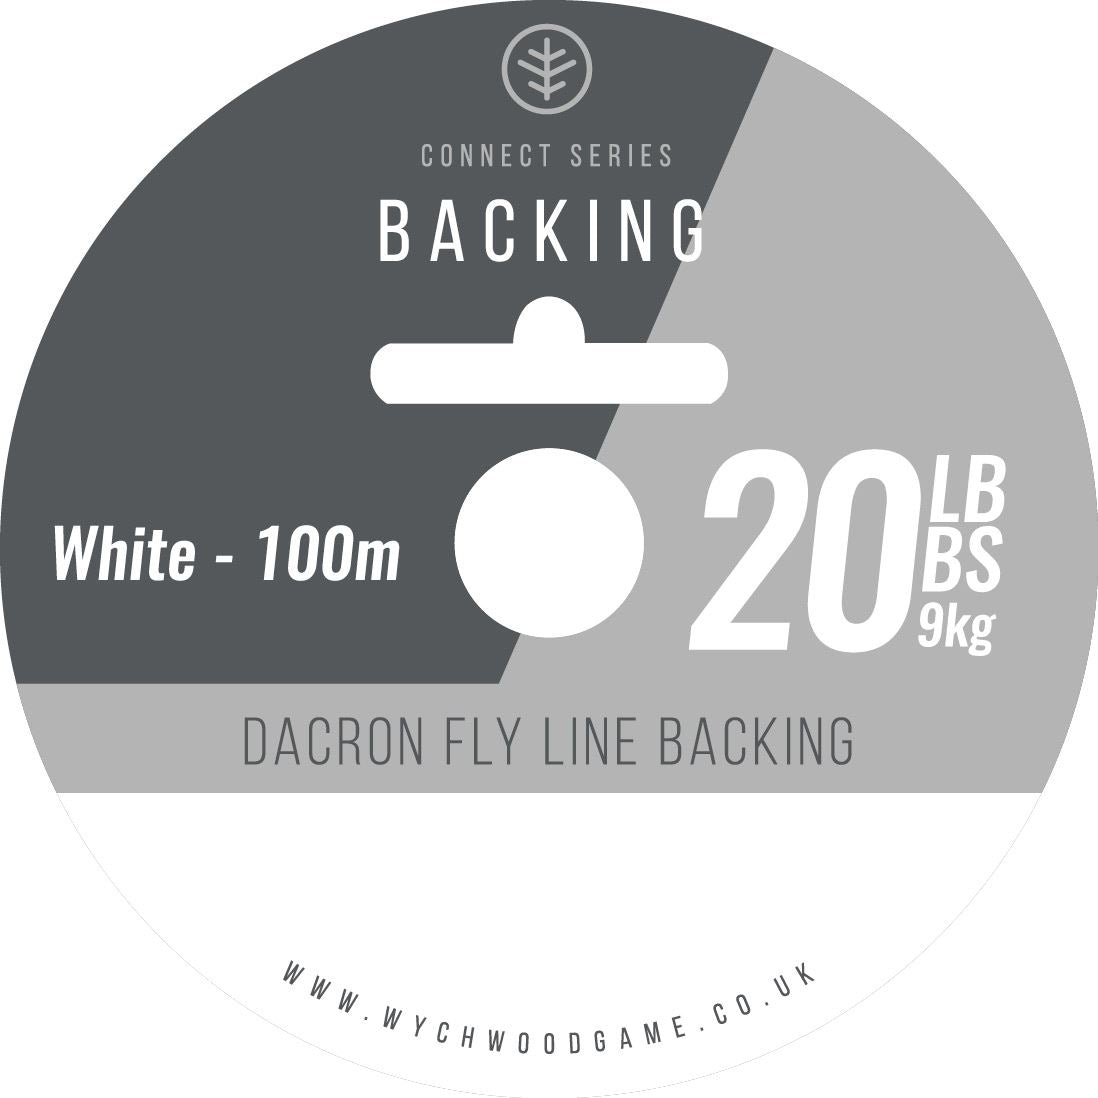 Wychwood Connect Series Backing Line 20LB White